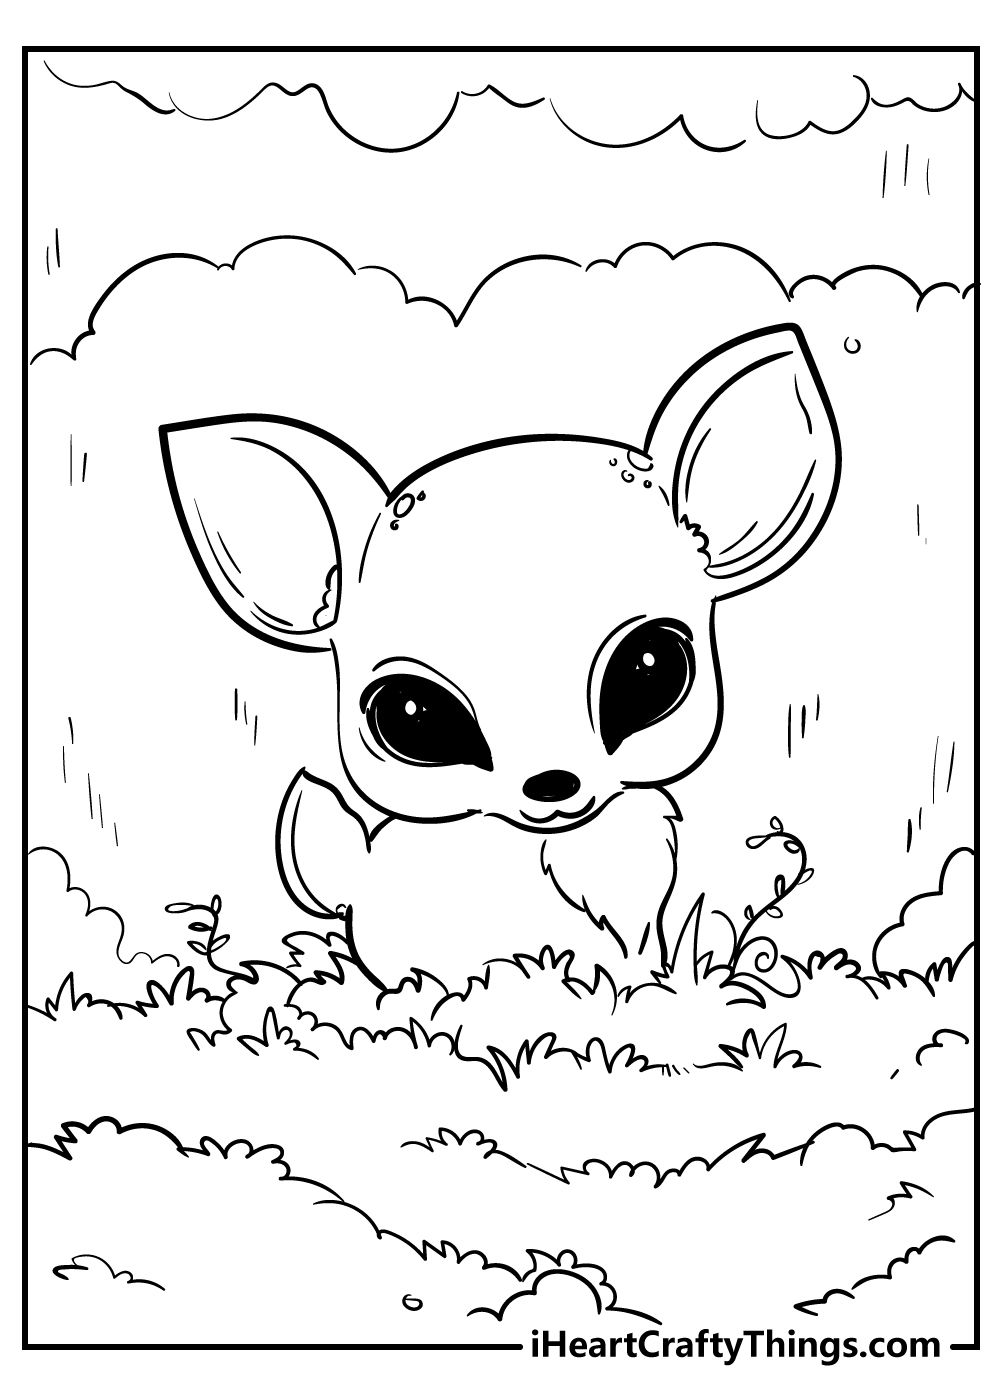 Cute animals coloring pages animal coloring pages chibi coloring pages coloring pages